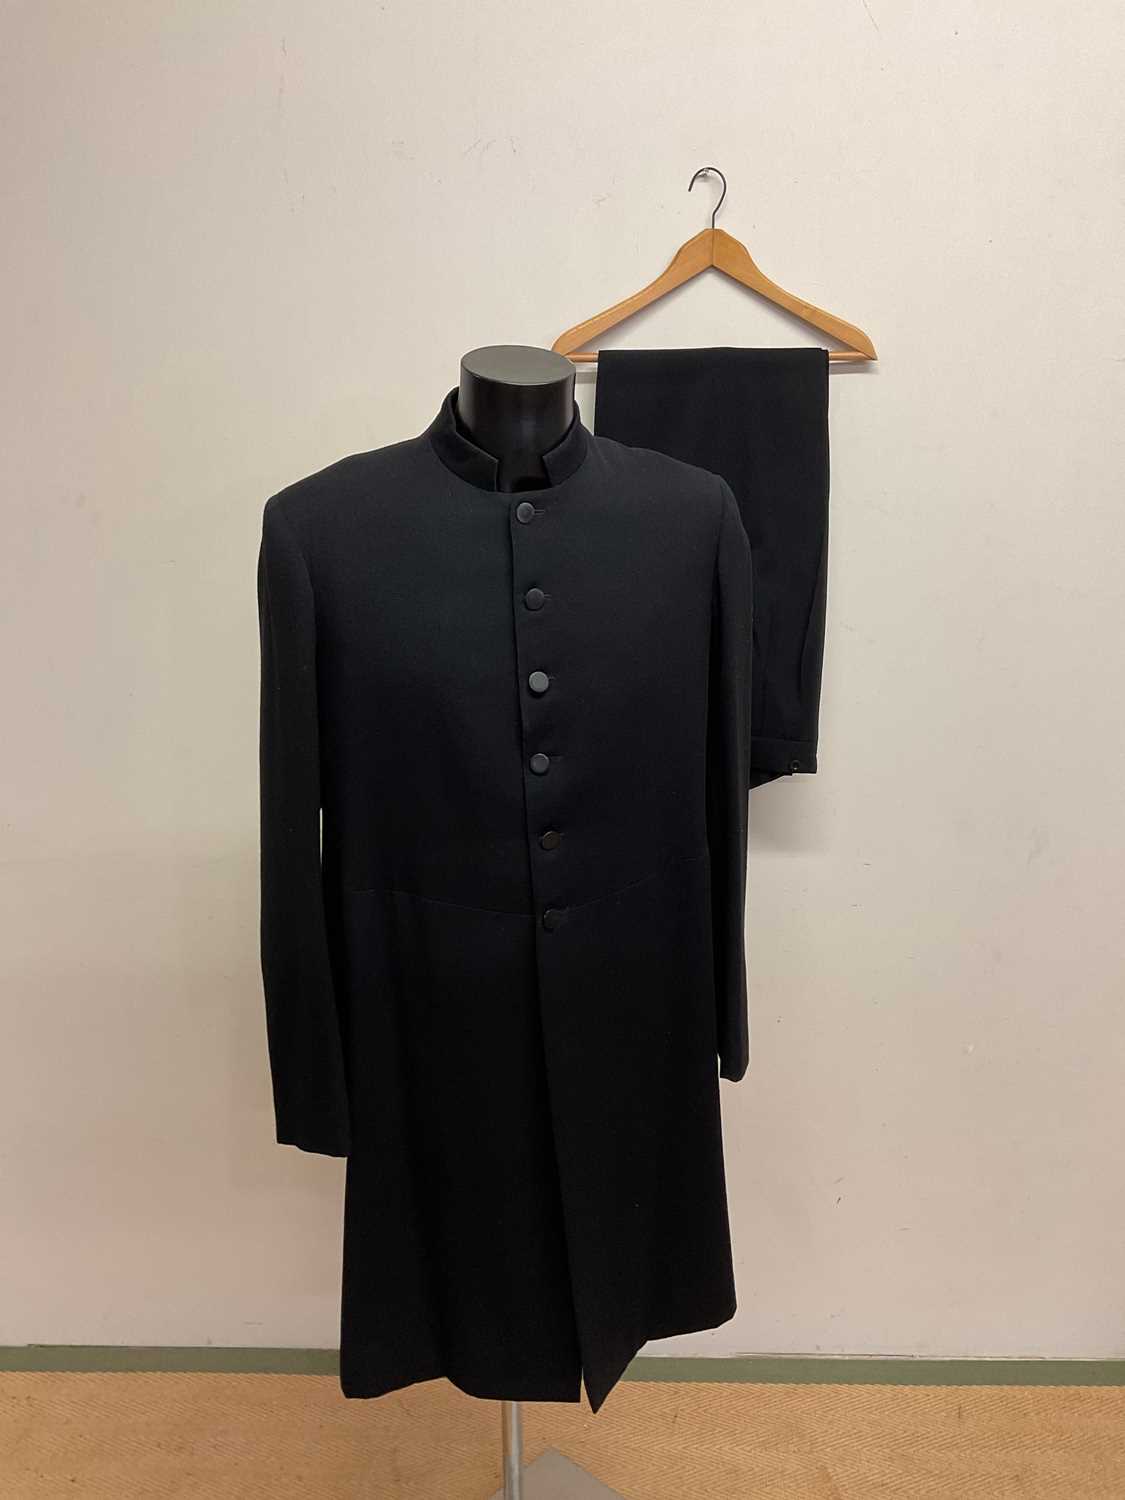 A vintage frock coat and trousers by Browne Bowles, jacket chest 42", trousers waist 36", inside leg